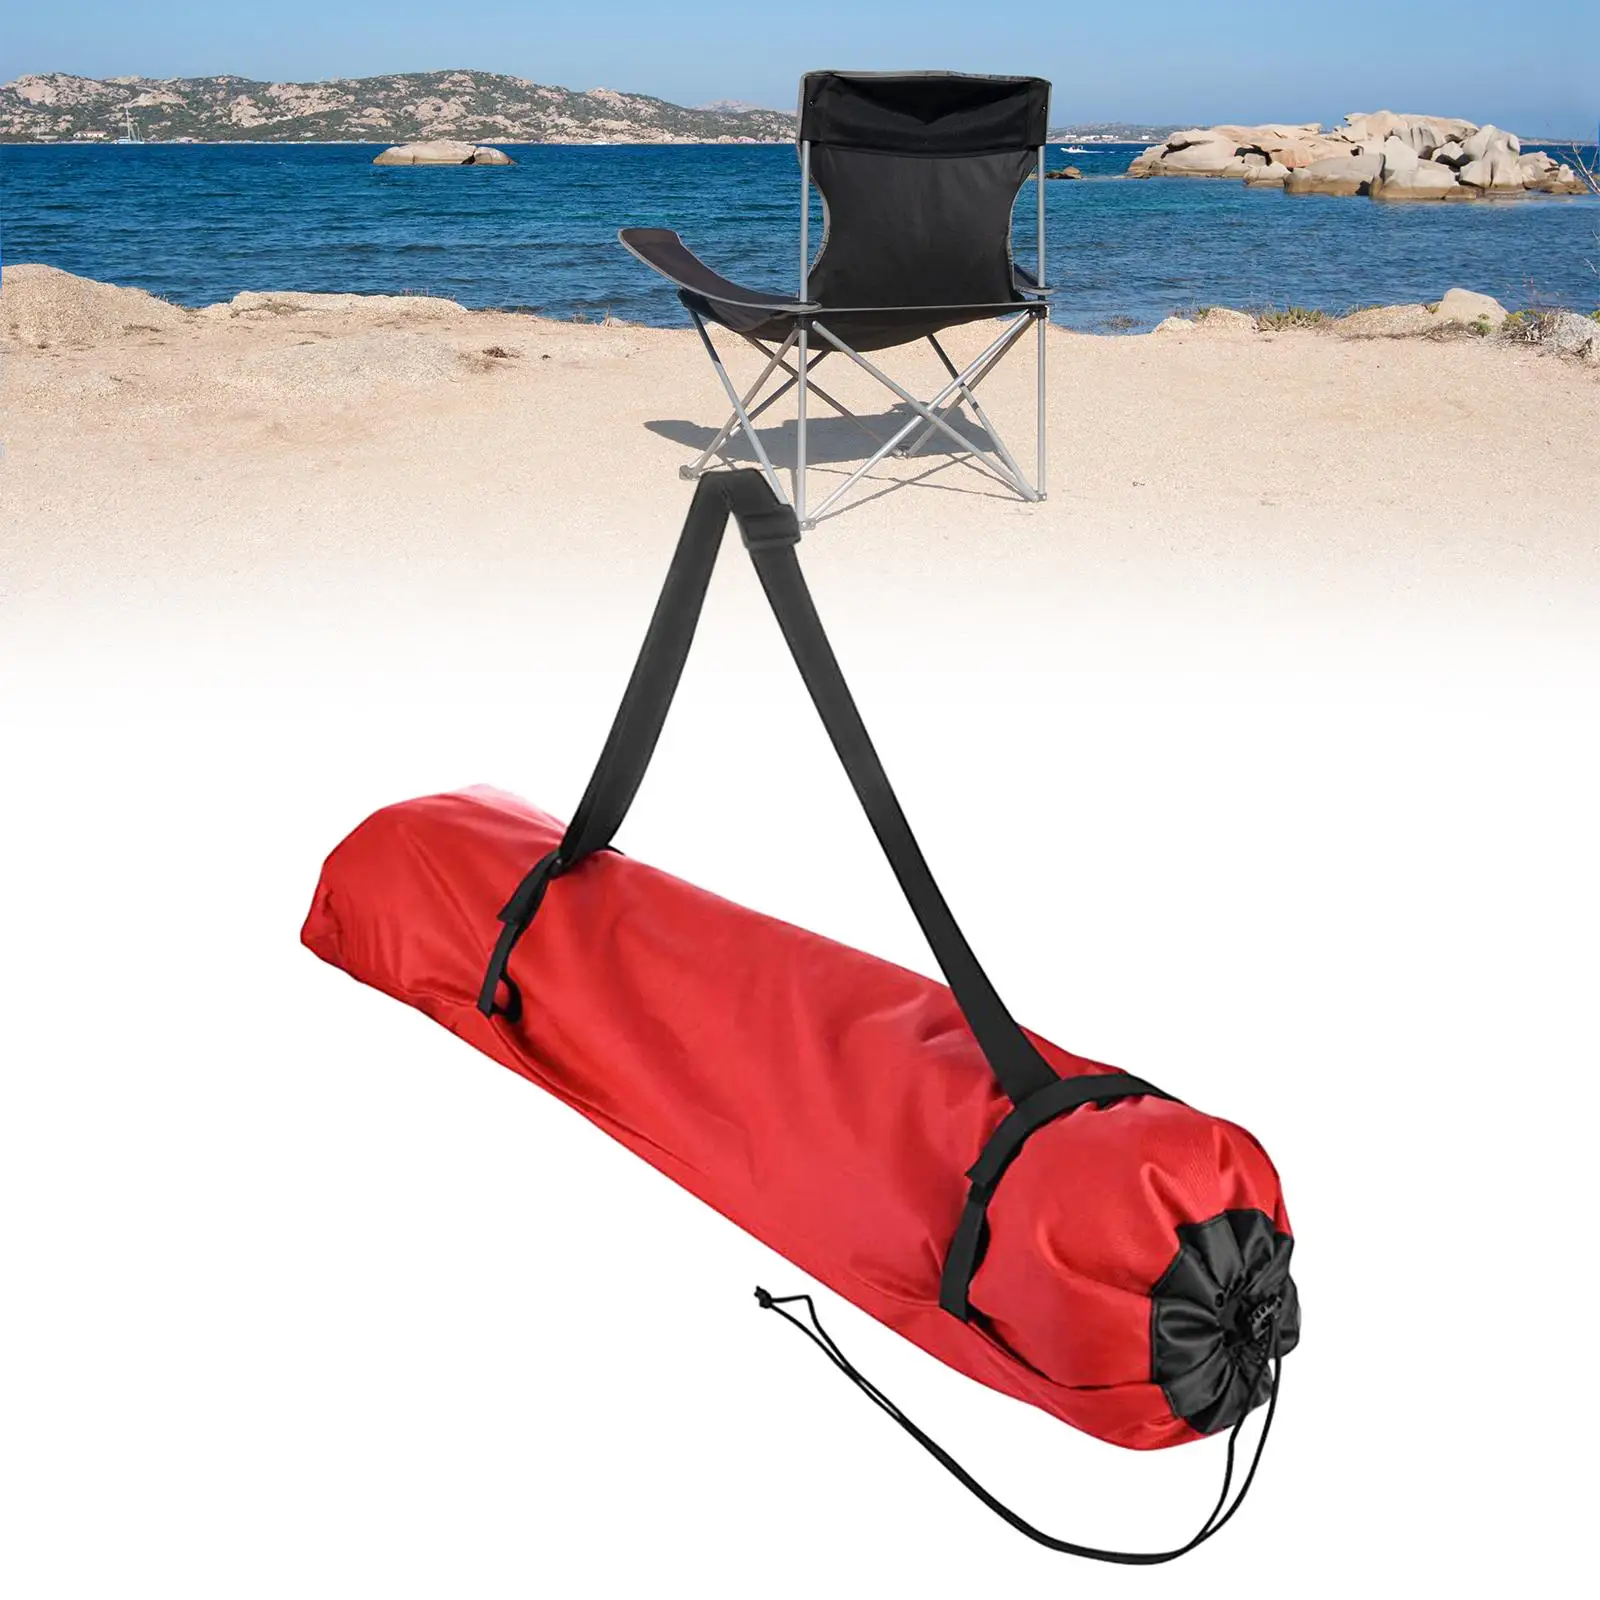 Folding Chair Storage Bag Drawstring Closure Portable Camping Chair Replacement Bag for Fishing Hiking Backpacking Travel Beach